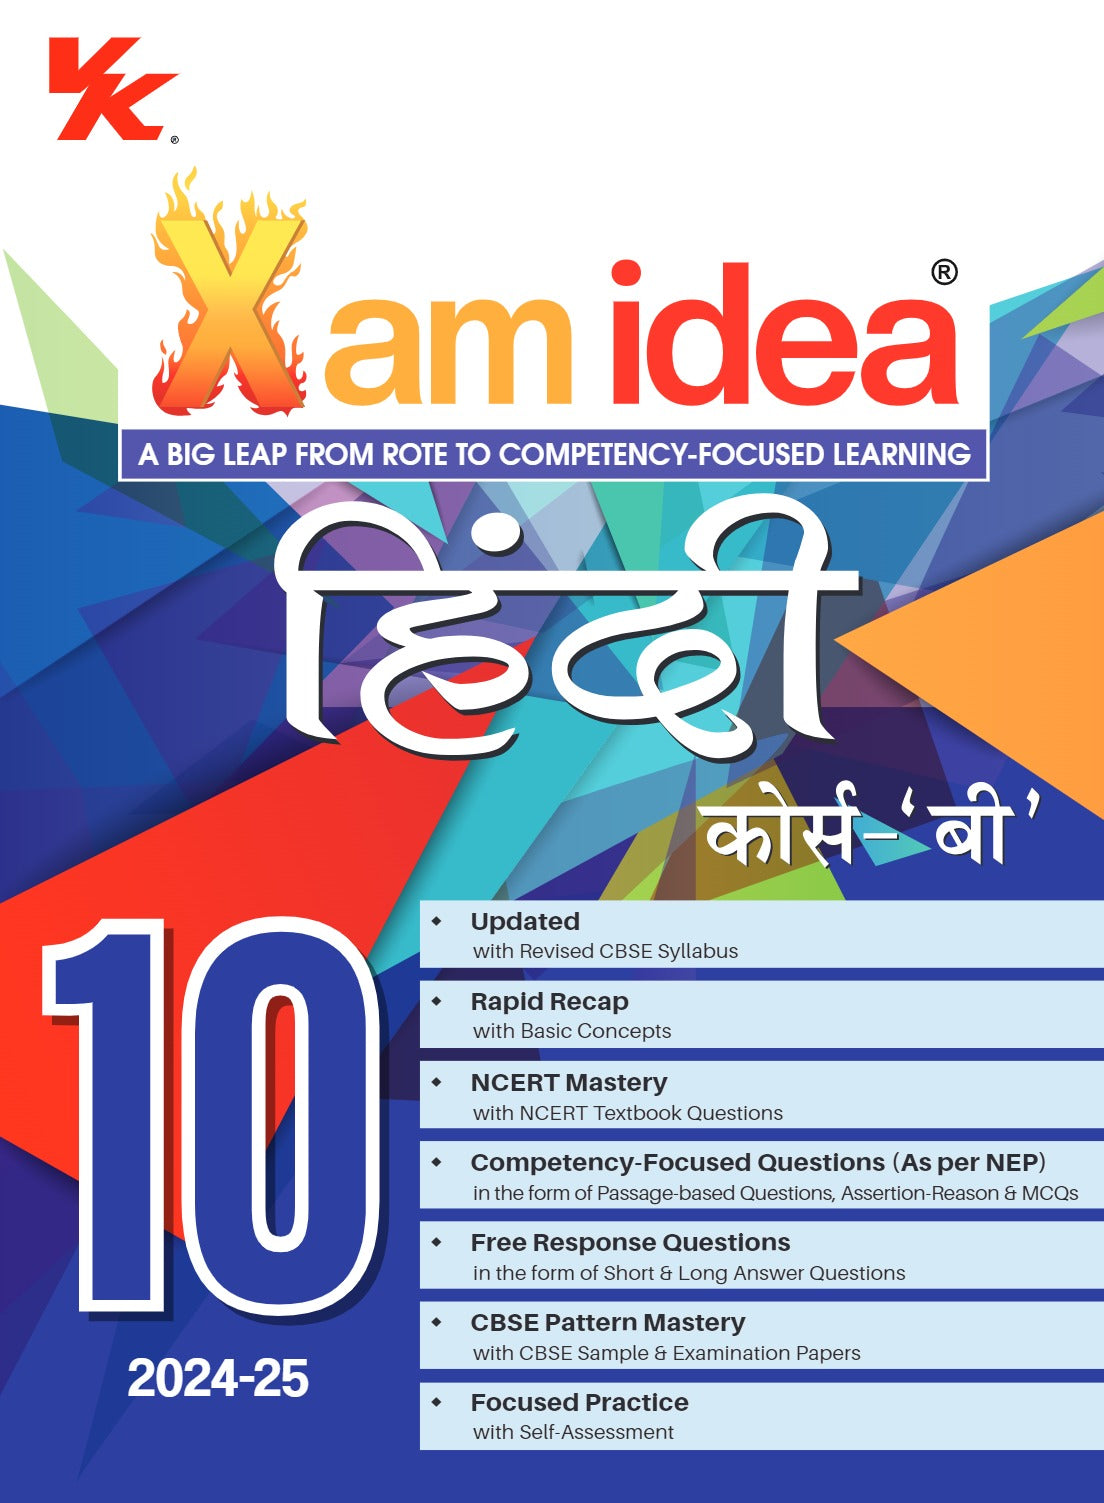 Xam idea Hindi Course B Class 10 Book | CBSE Board | Chapterwise Question Bank | Based on Revised CBSE Syllabus | NCERT Questions Included | 2024-25 Exam